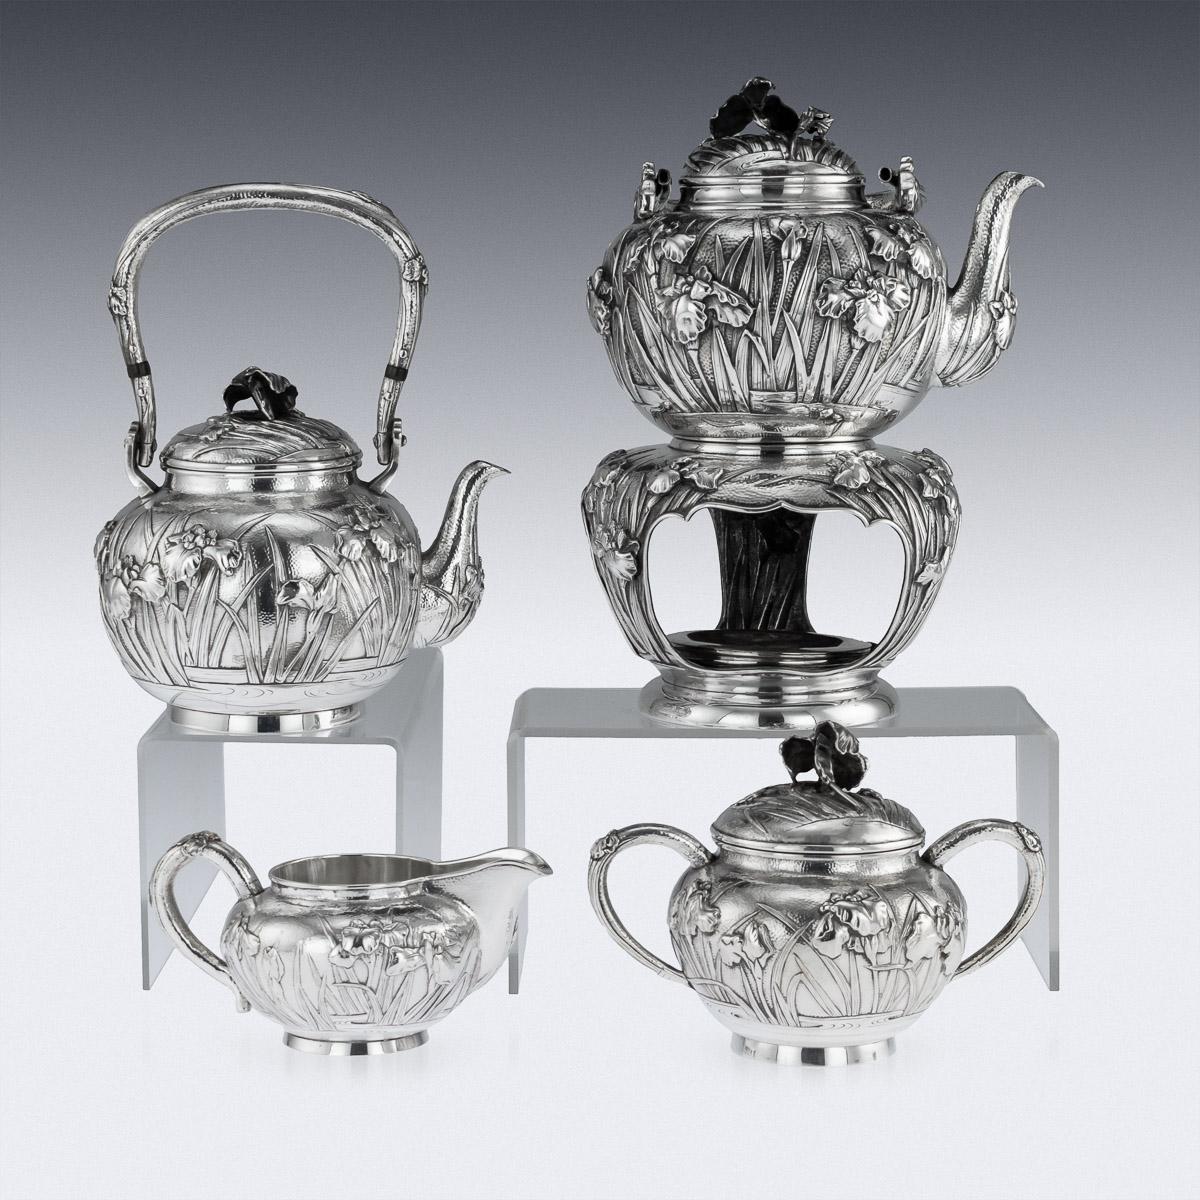 20th Century Japanese Solid Silver Tea & Coffee Service on Tray, circa 1900 1